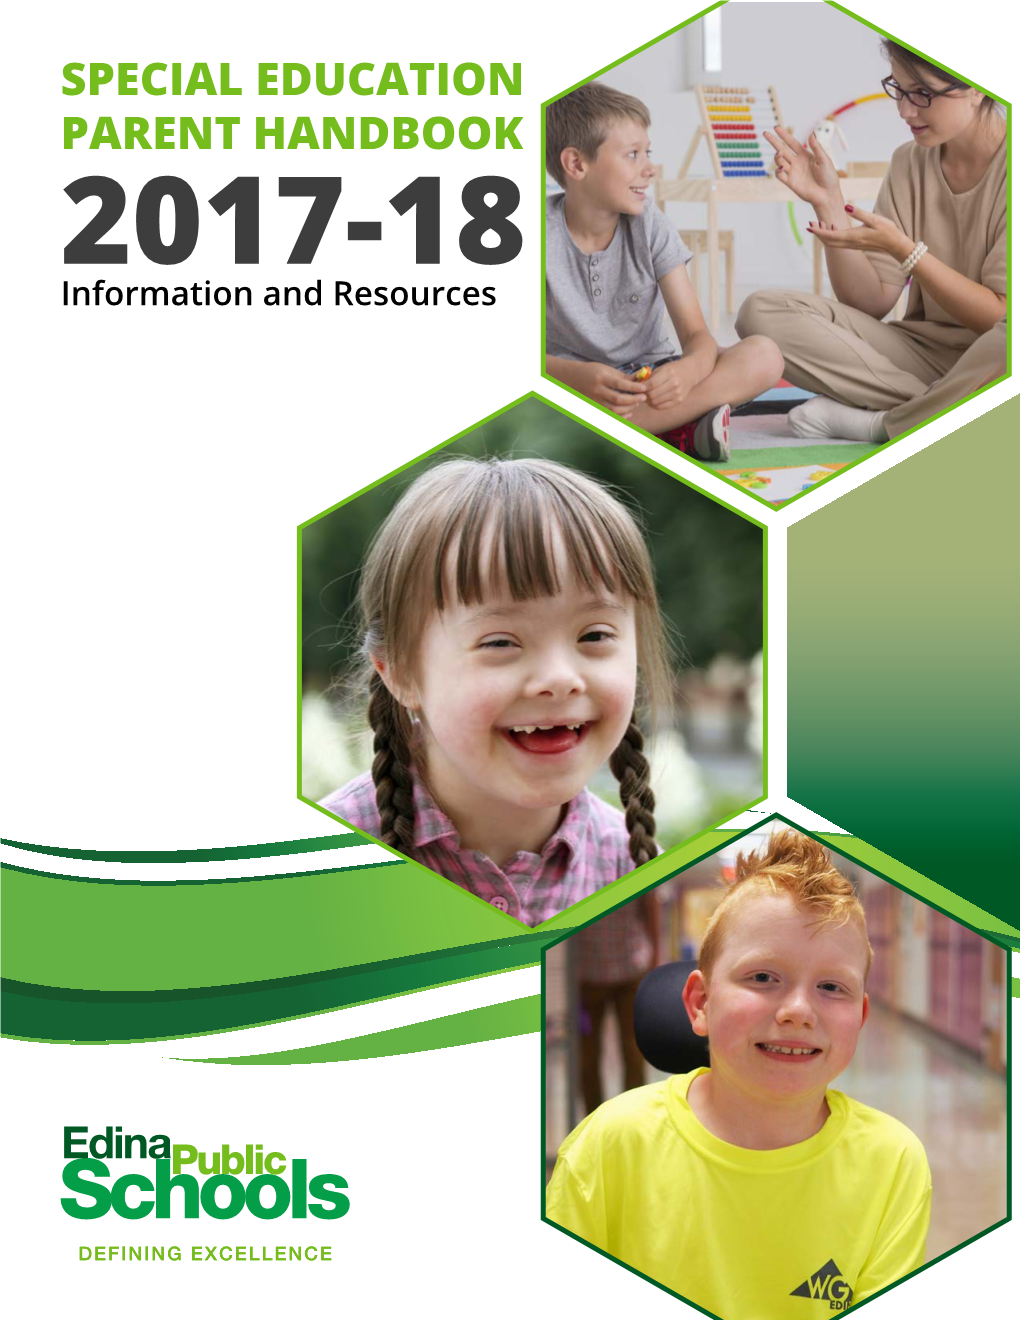 SPECIAL EDUCATION PARENT HANDBOOK 2017-18 Information and Resources Table of Contents